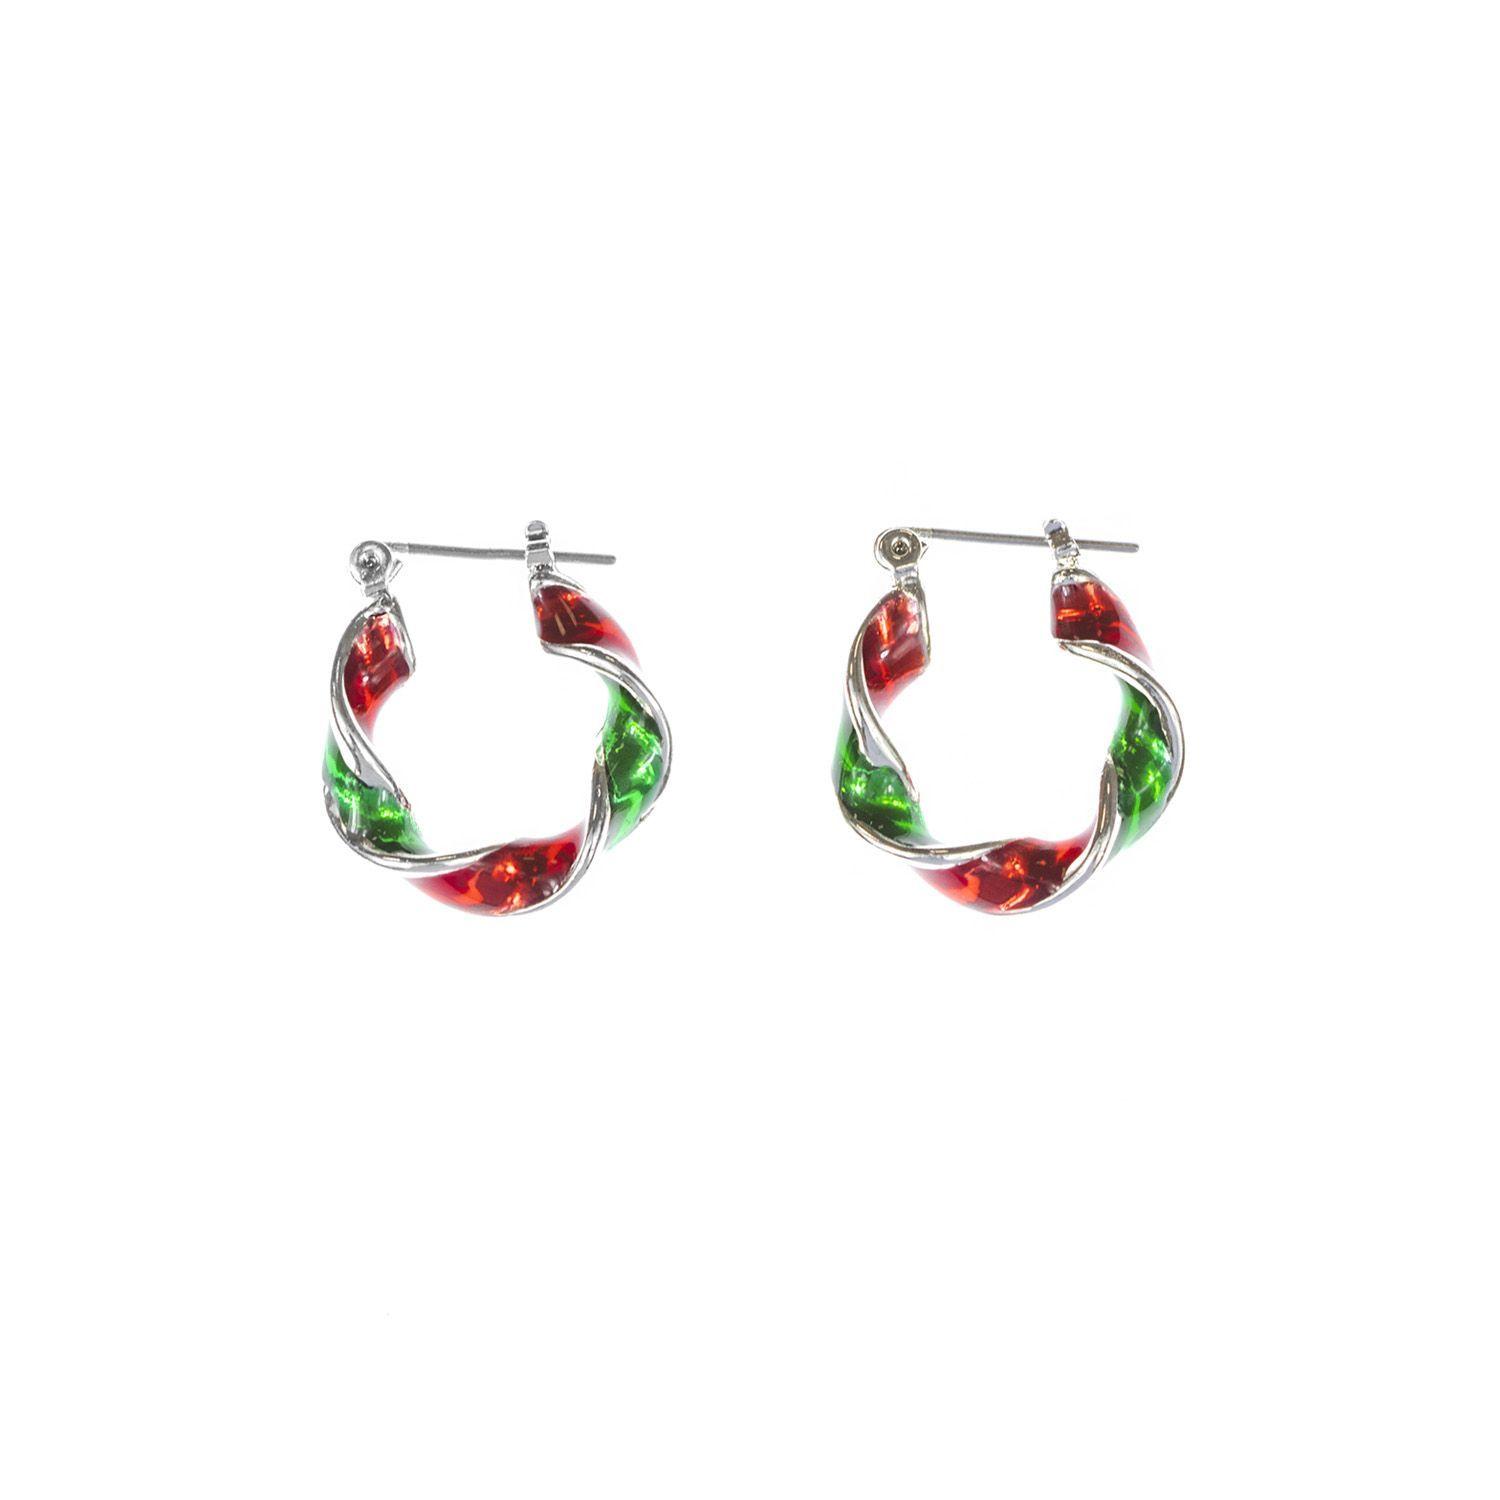 Red Green Twist Logo - SimplyWhispers: Allergy-Safe Hypoallergenic Jewelry, Nickel Free for ...